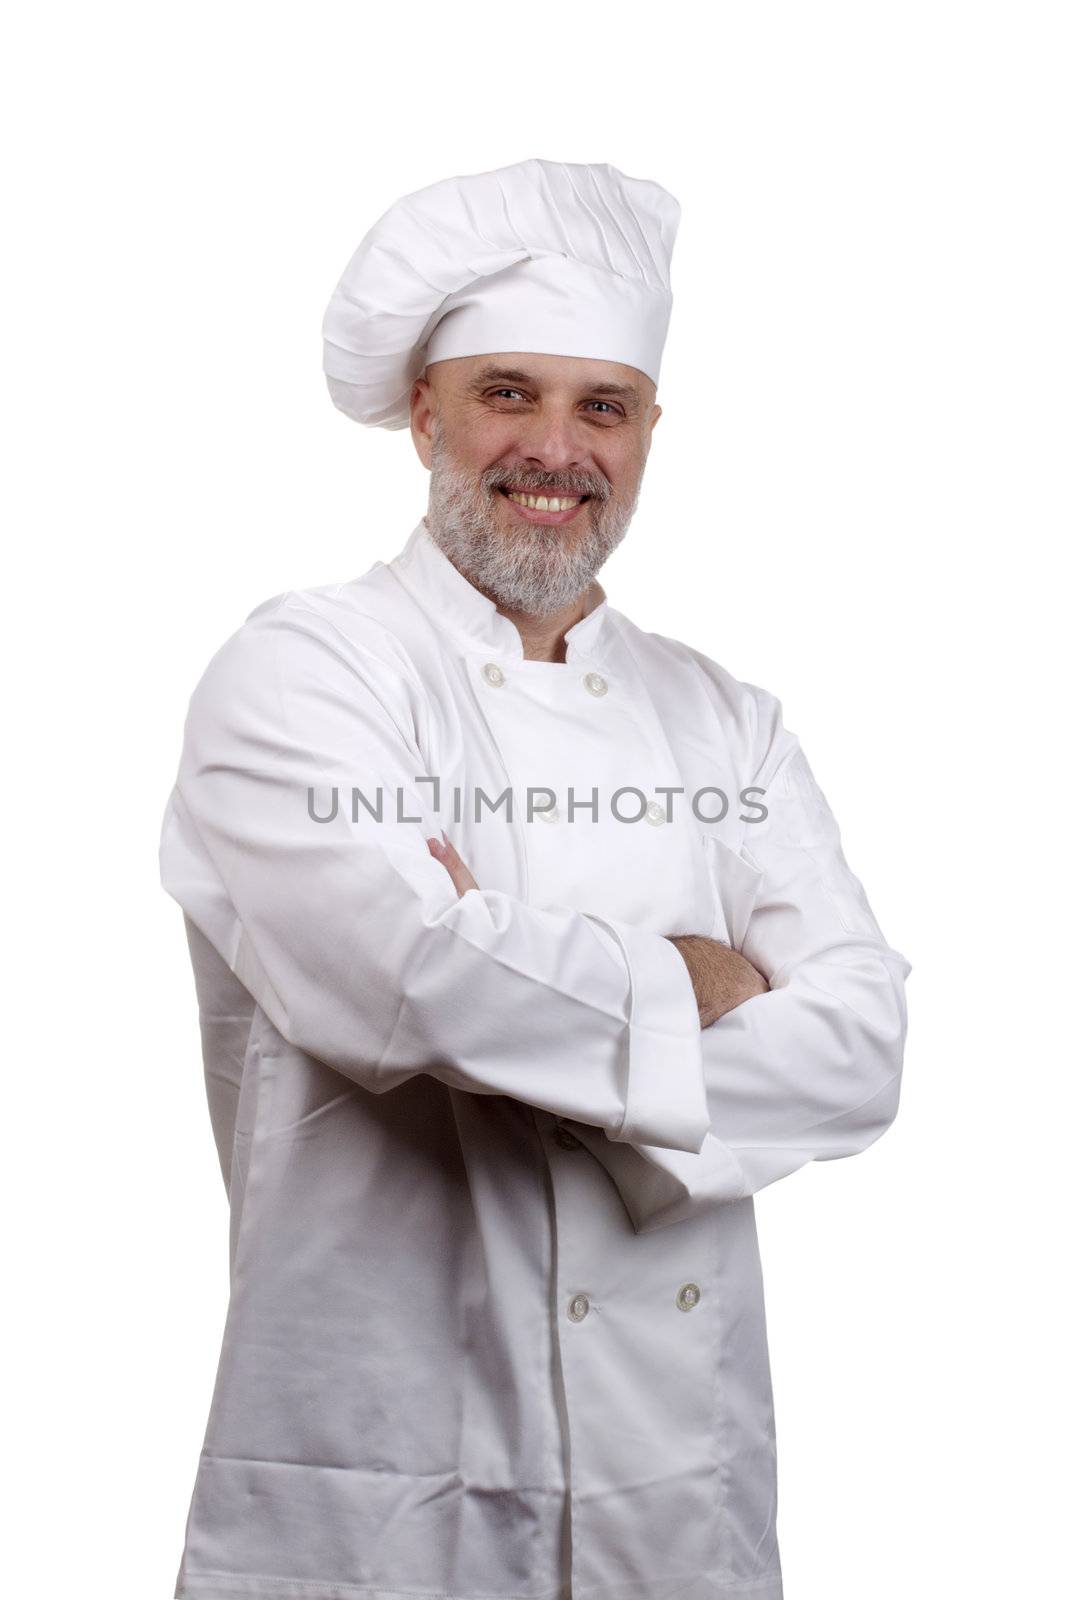 Portrait of a happy chef in a chef's hat and uniform isolated on a white background.